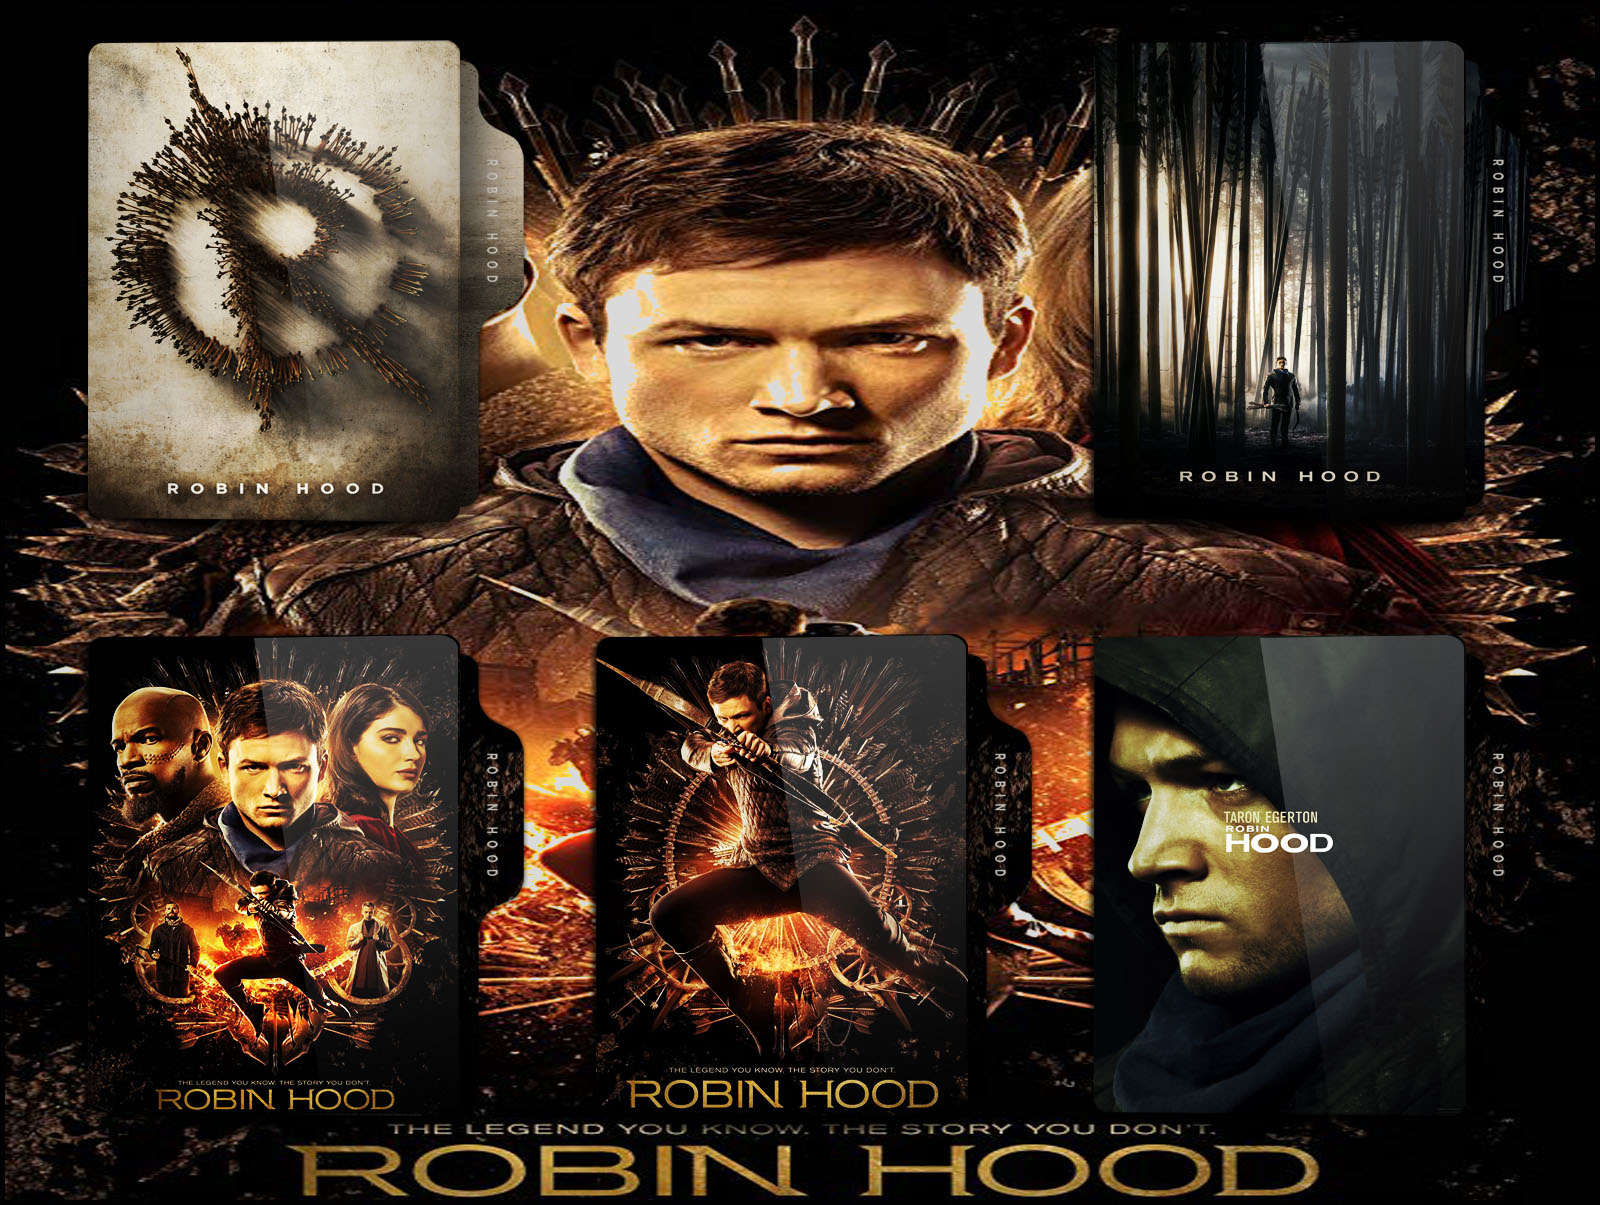 Robin Hood 2018 Movie Poster Wallpapers